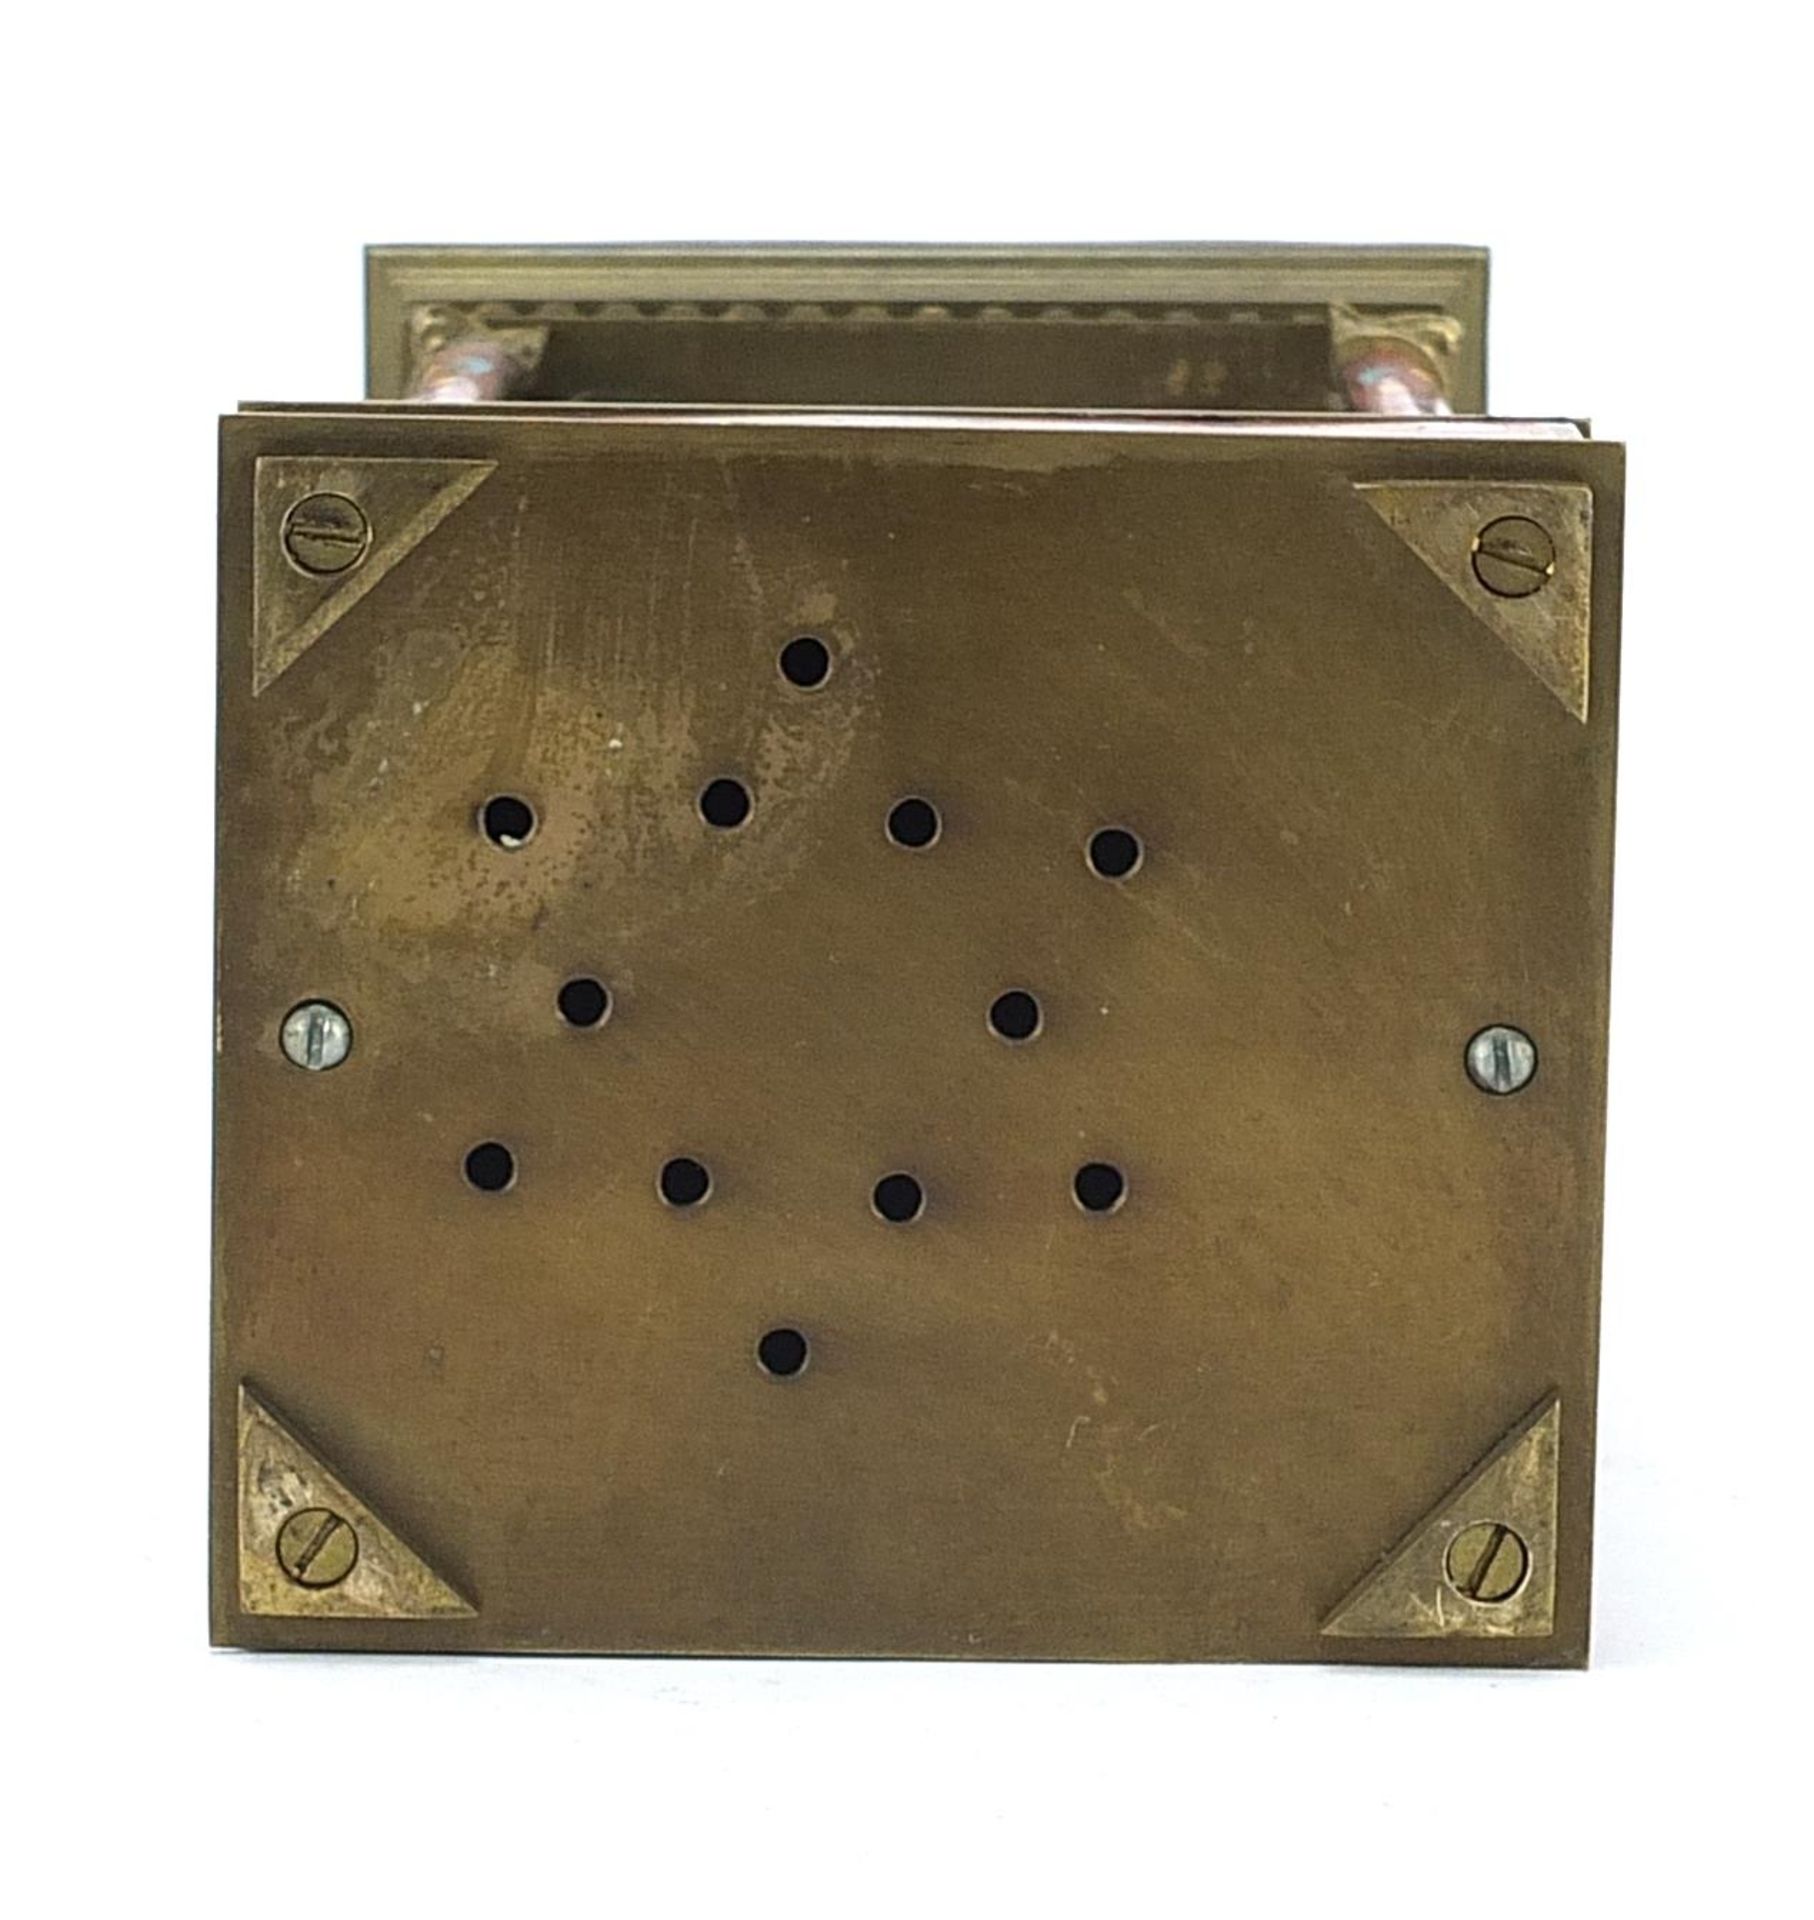 Champleve enamel brass repeating carriage clock with subsidiary dial, 16.5cm high - Image 4 of 4